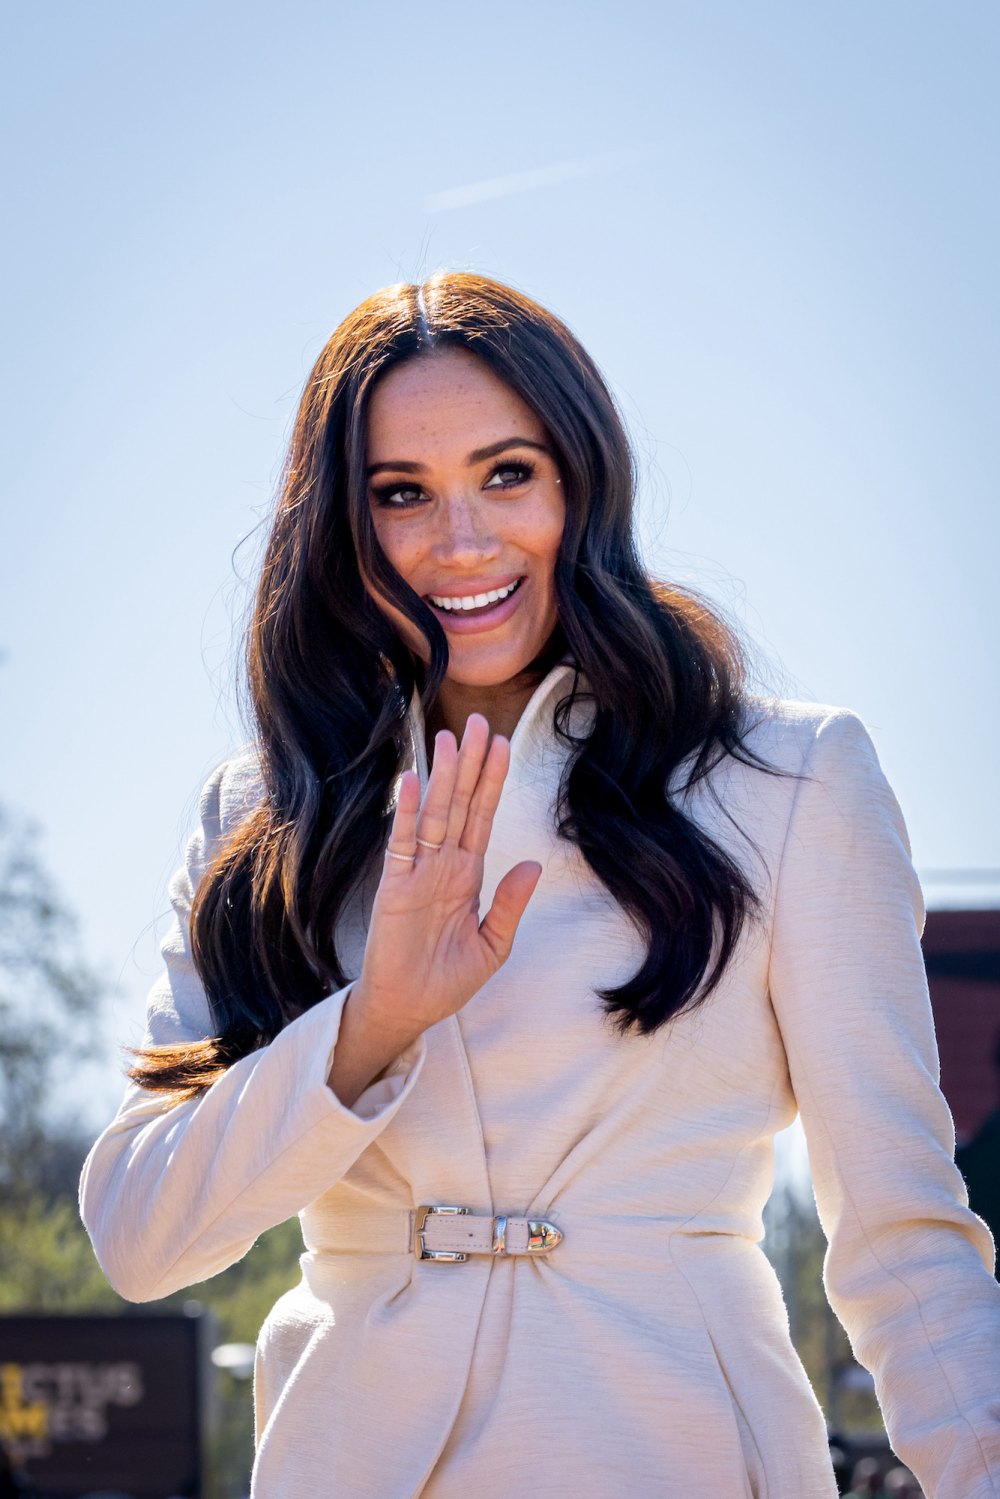 Meghan Markle Signs Podcast Deal 8 Months After Archetypes Was Canceled